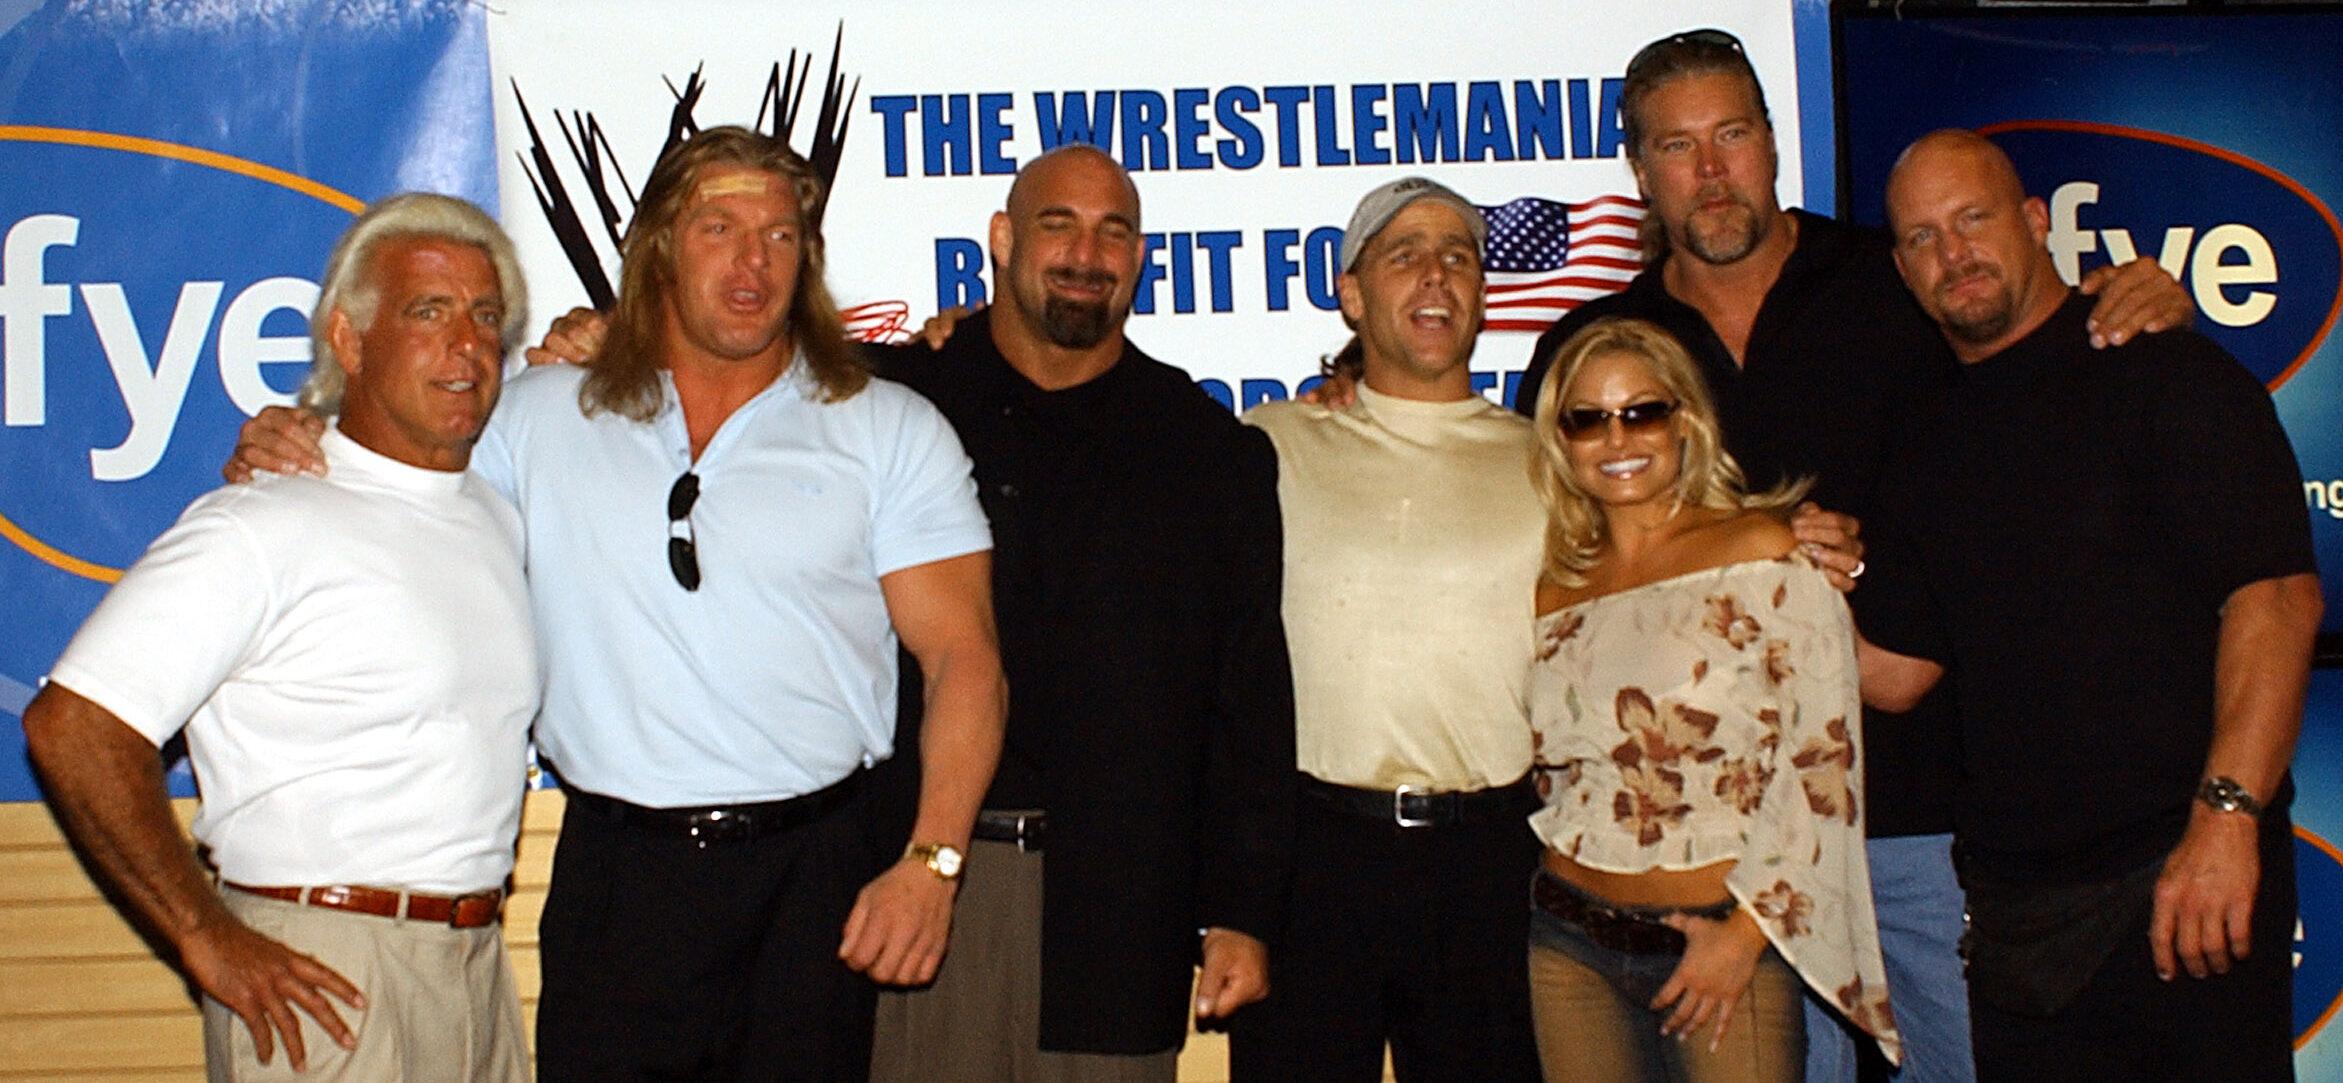 World Wrestling members raise money for families of military personnel killed in Iraq